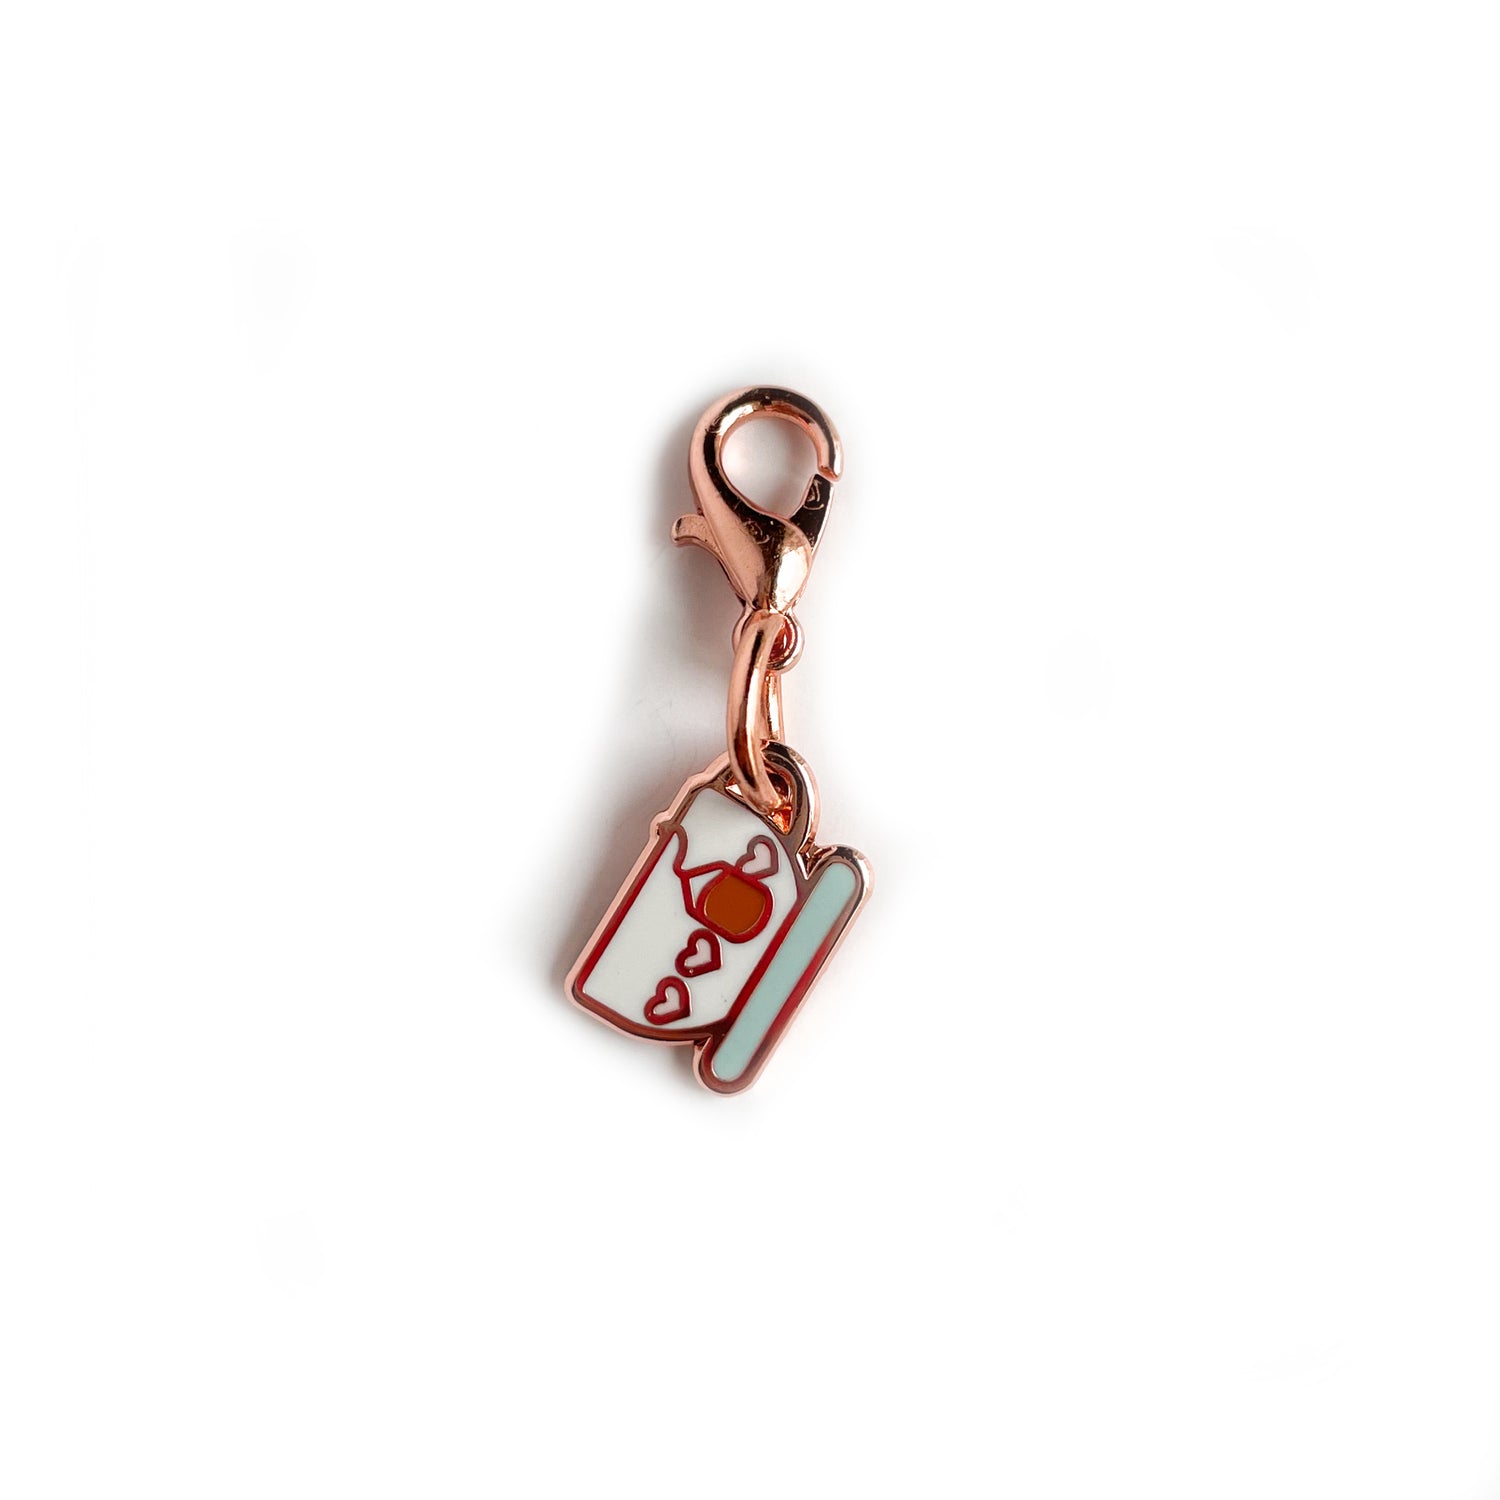 A charm on a lobster claw clasp that is shaped like a teacup with pink hearts on it and a teabag. 